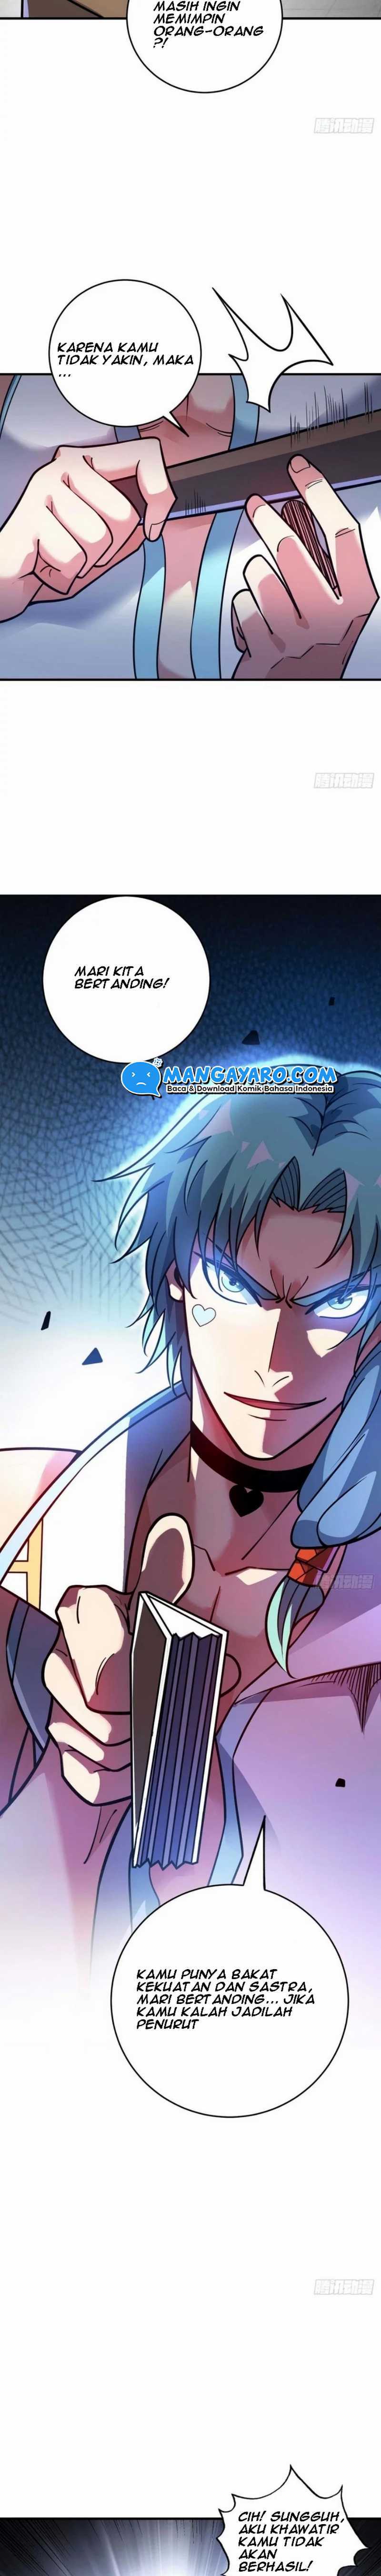 The First Son-In-Law Vanguard of All Time Chapter 162